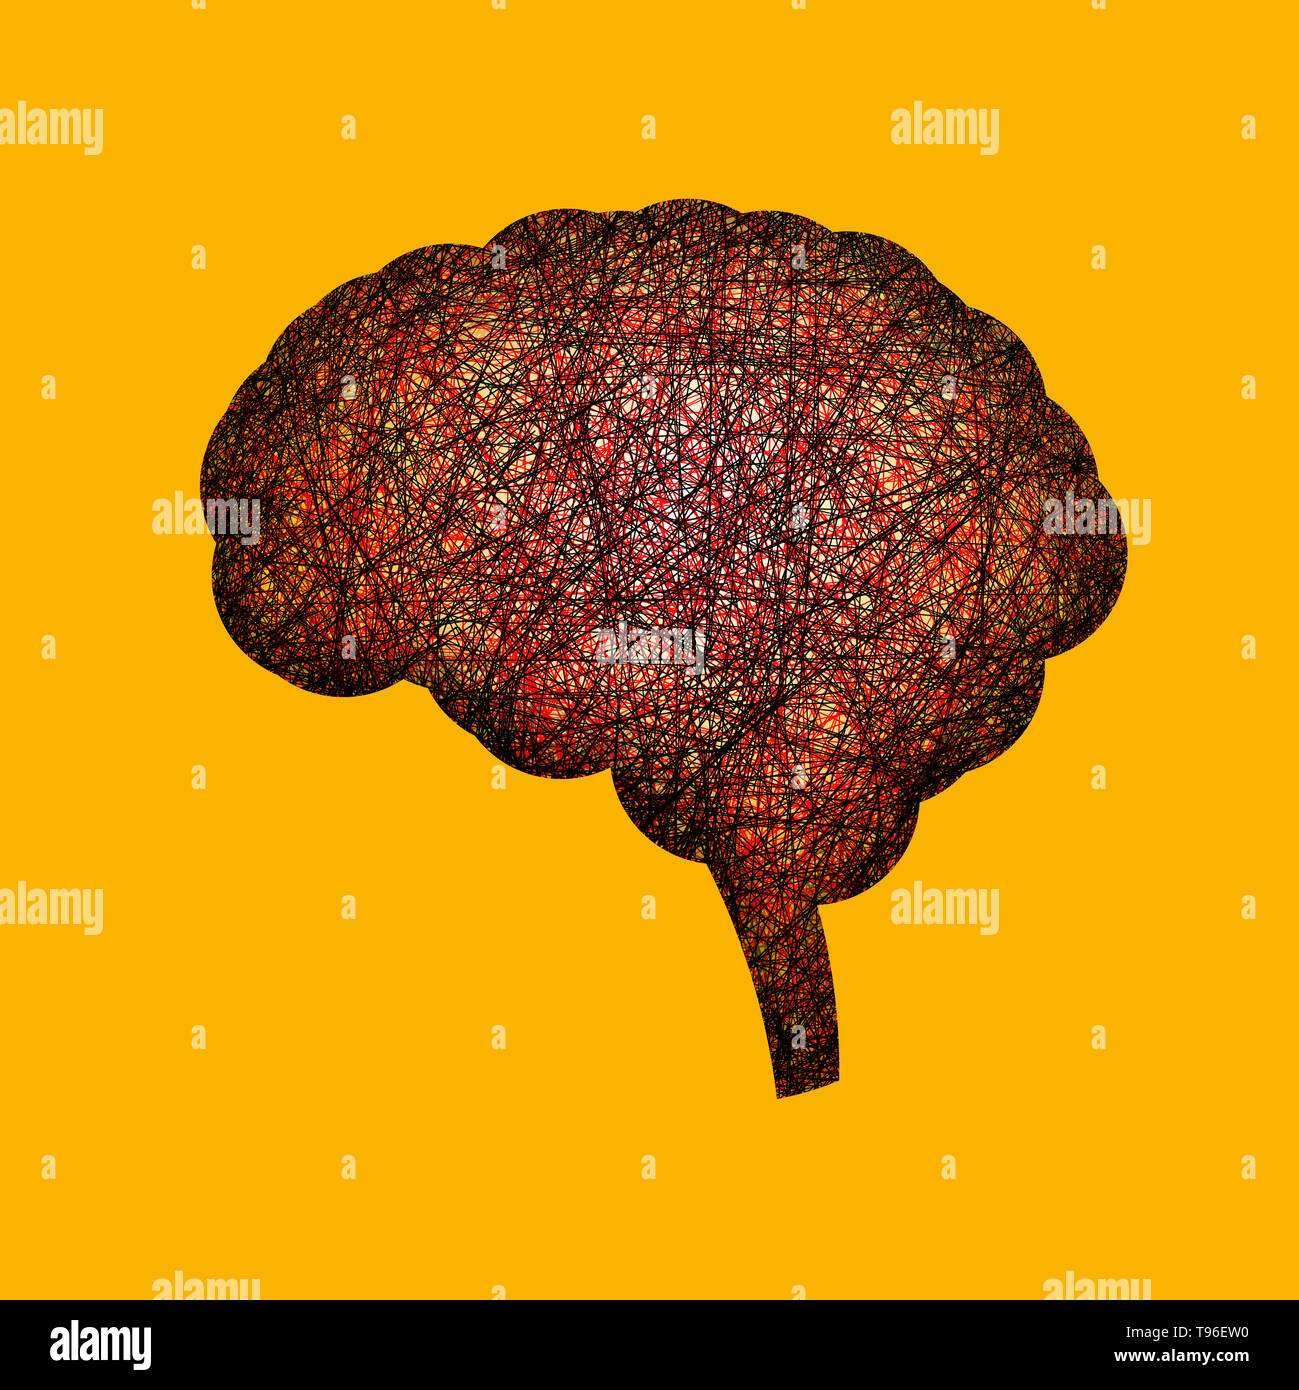 Conceptual Concept Brain connected by white and red lines, Connections, network, networking, Interconnected, yellow Background Stock Photo